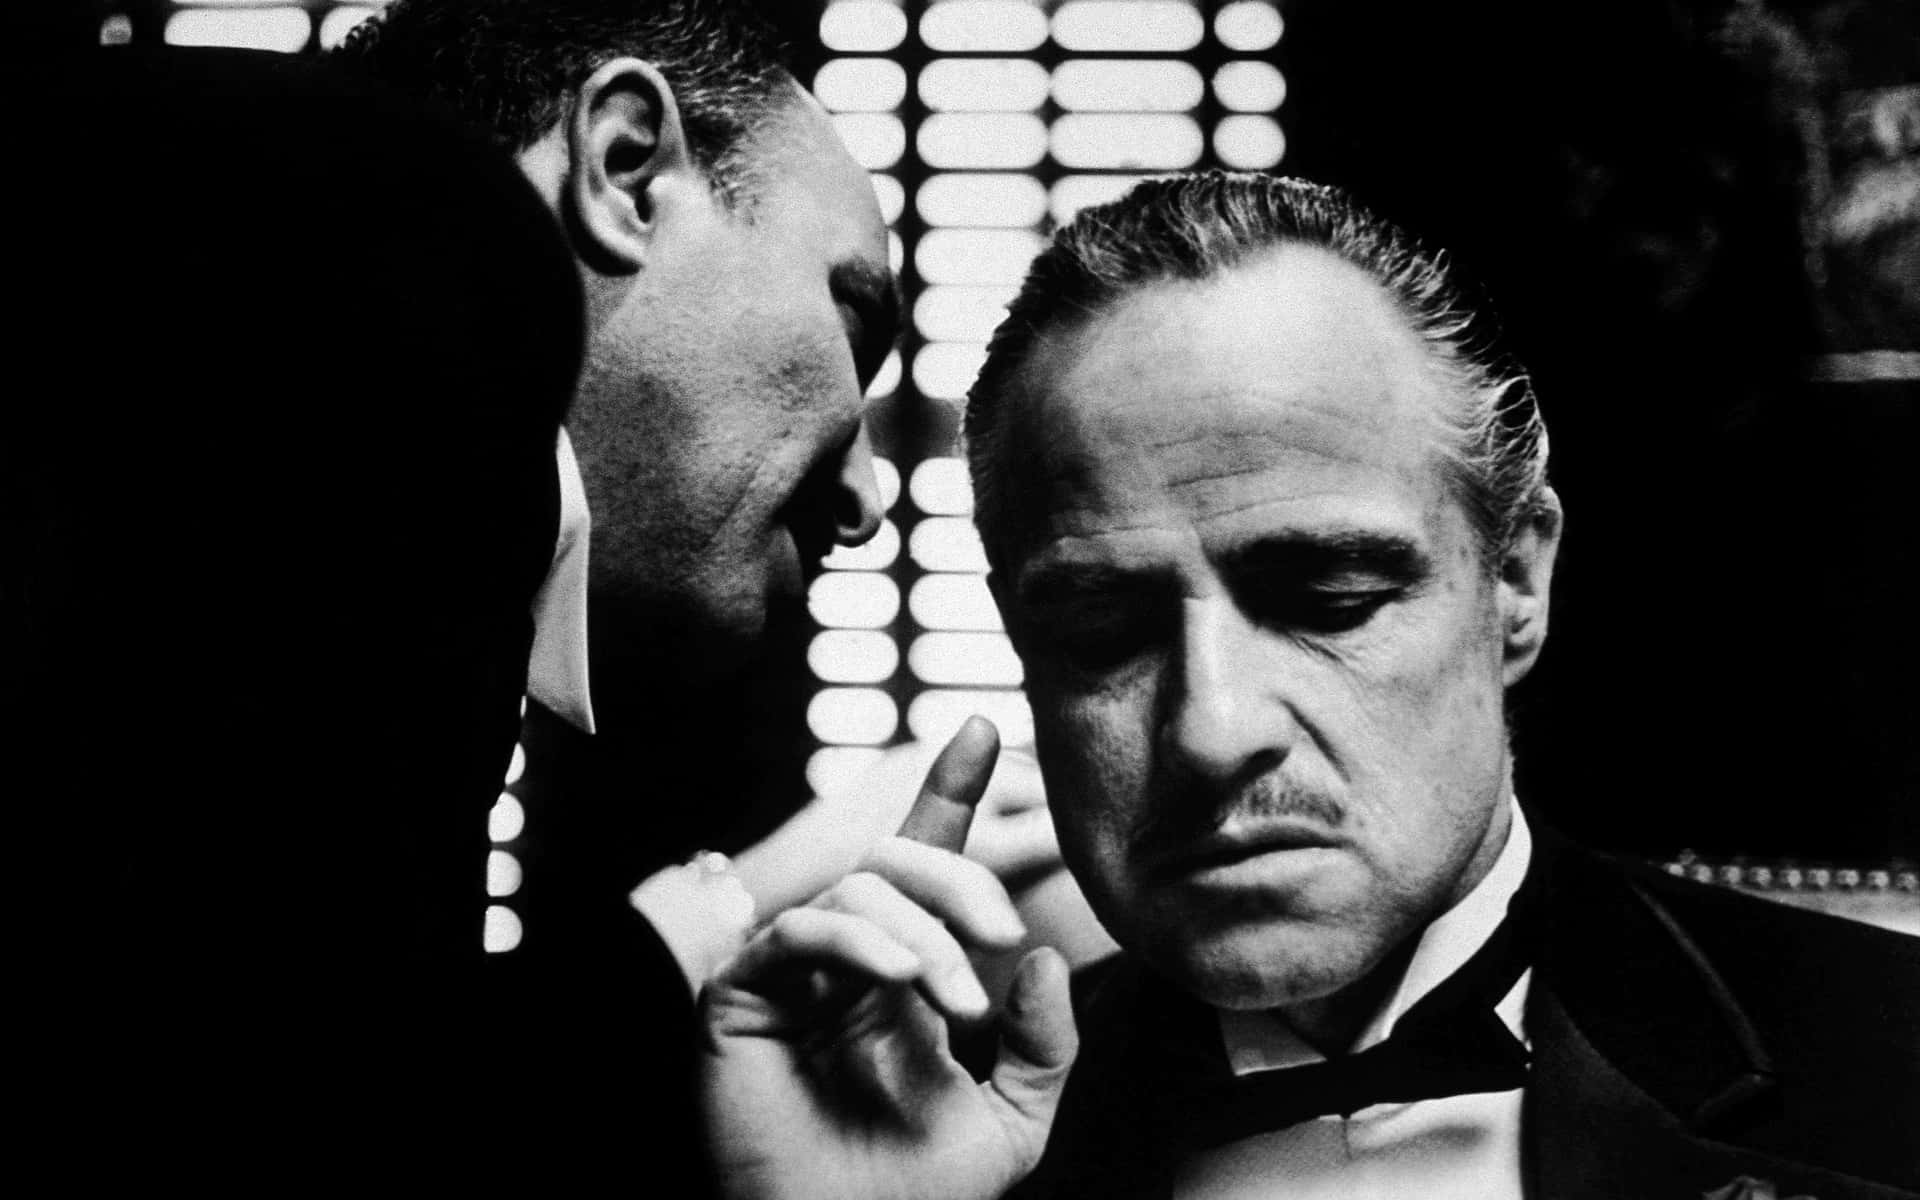 The Godfather - A Black And White Photo Of Two Men Wallpaper